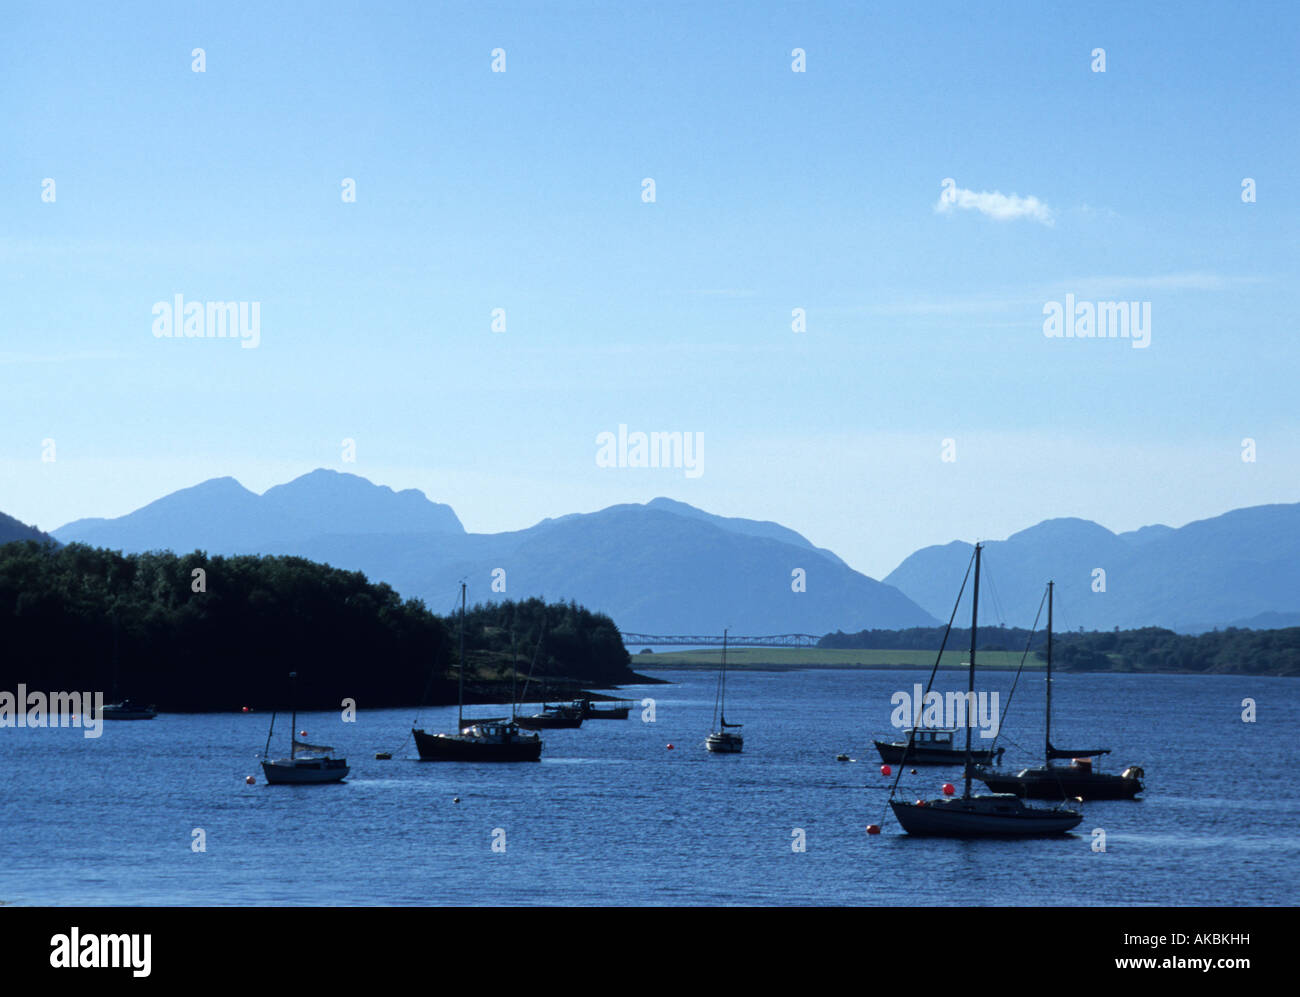 Boats In Loch In Perthshire,Scotland,Uk Stock Photo